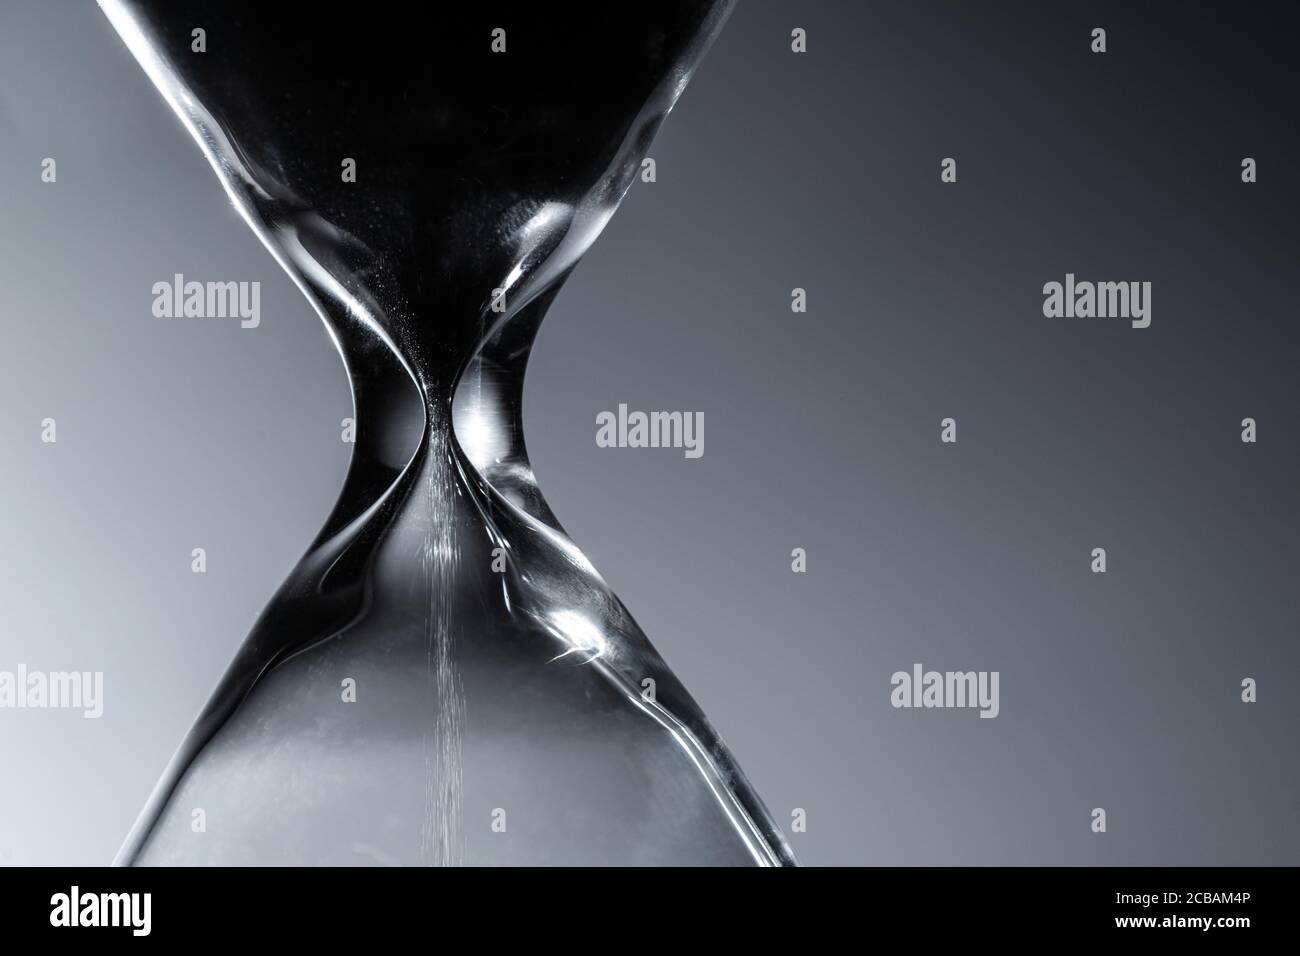 Contemporary Large Hourglass or Sandglass in a Dark Close Up. Old Times Timepiece Technology. Stock Photo